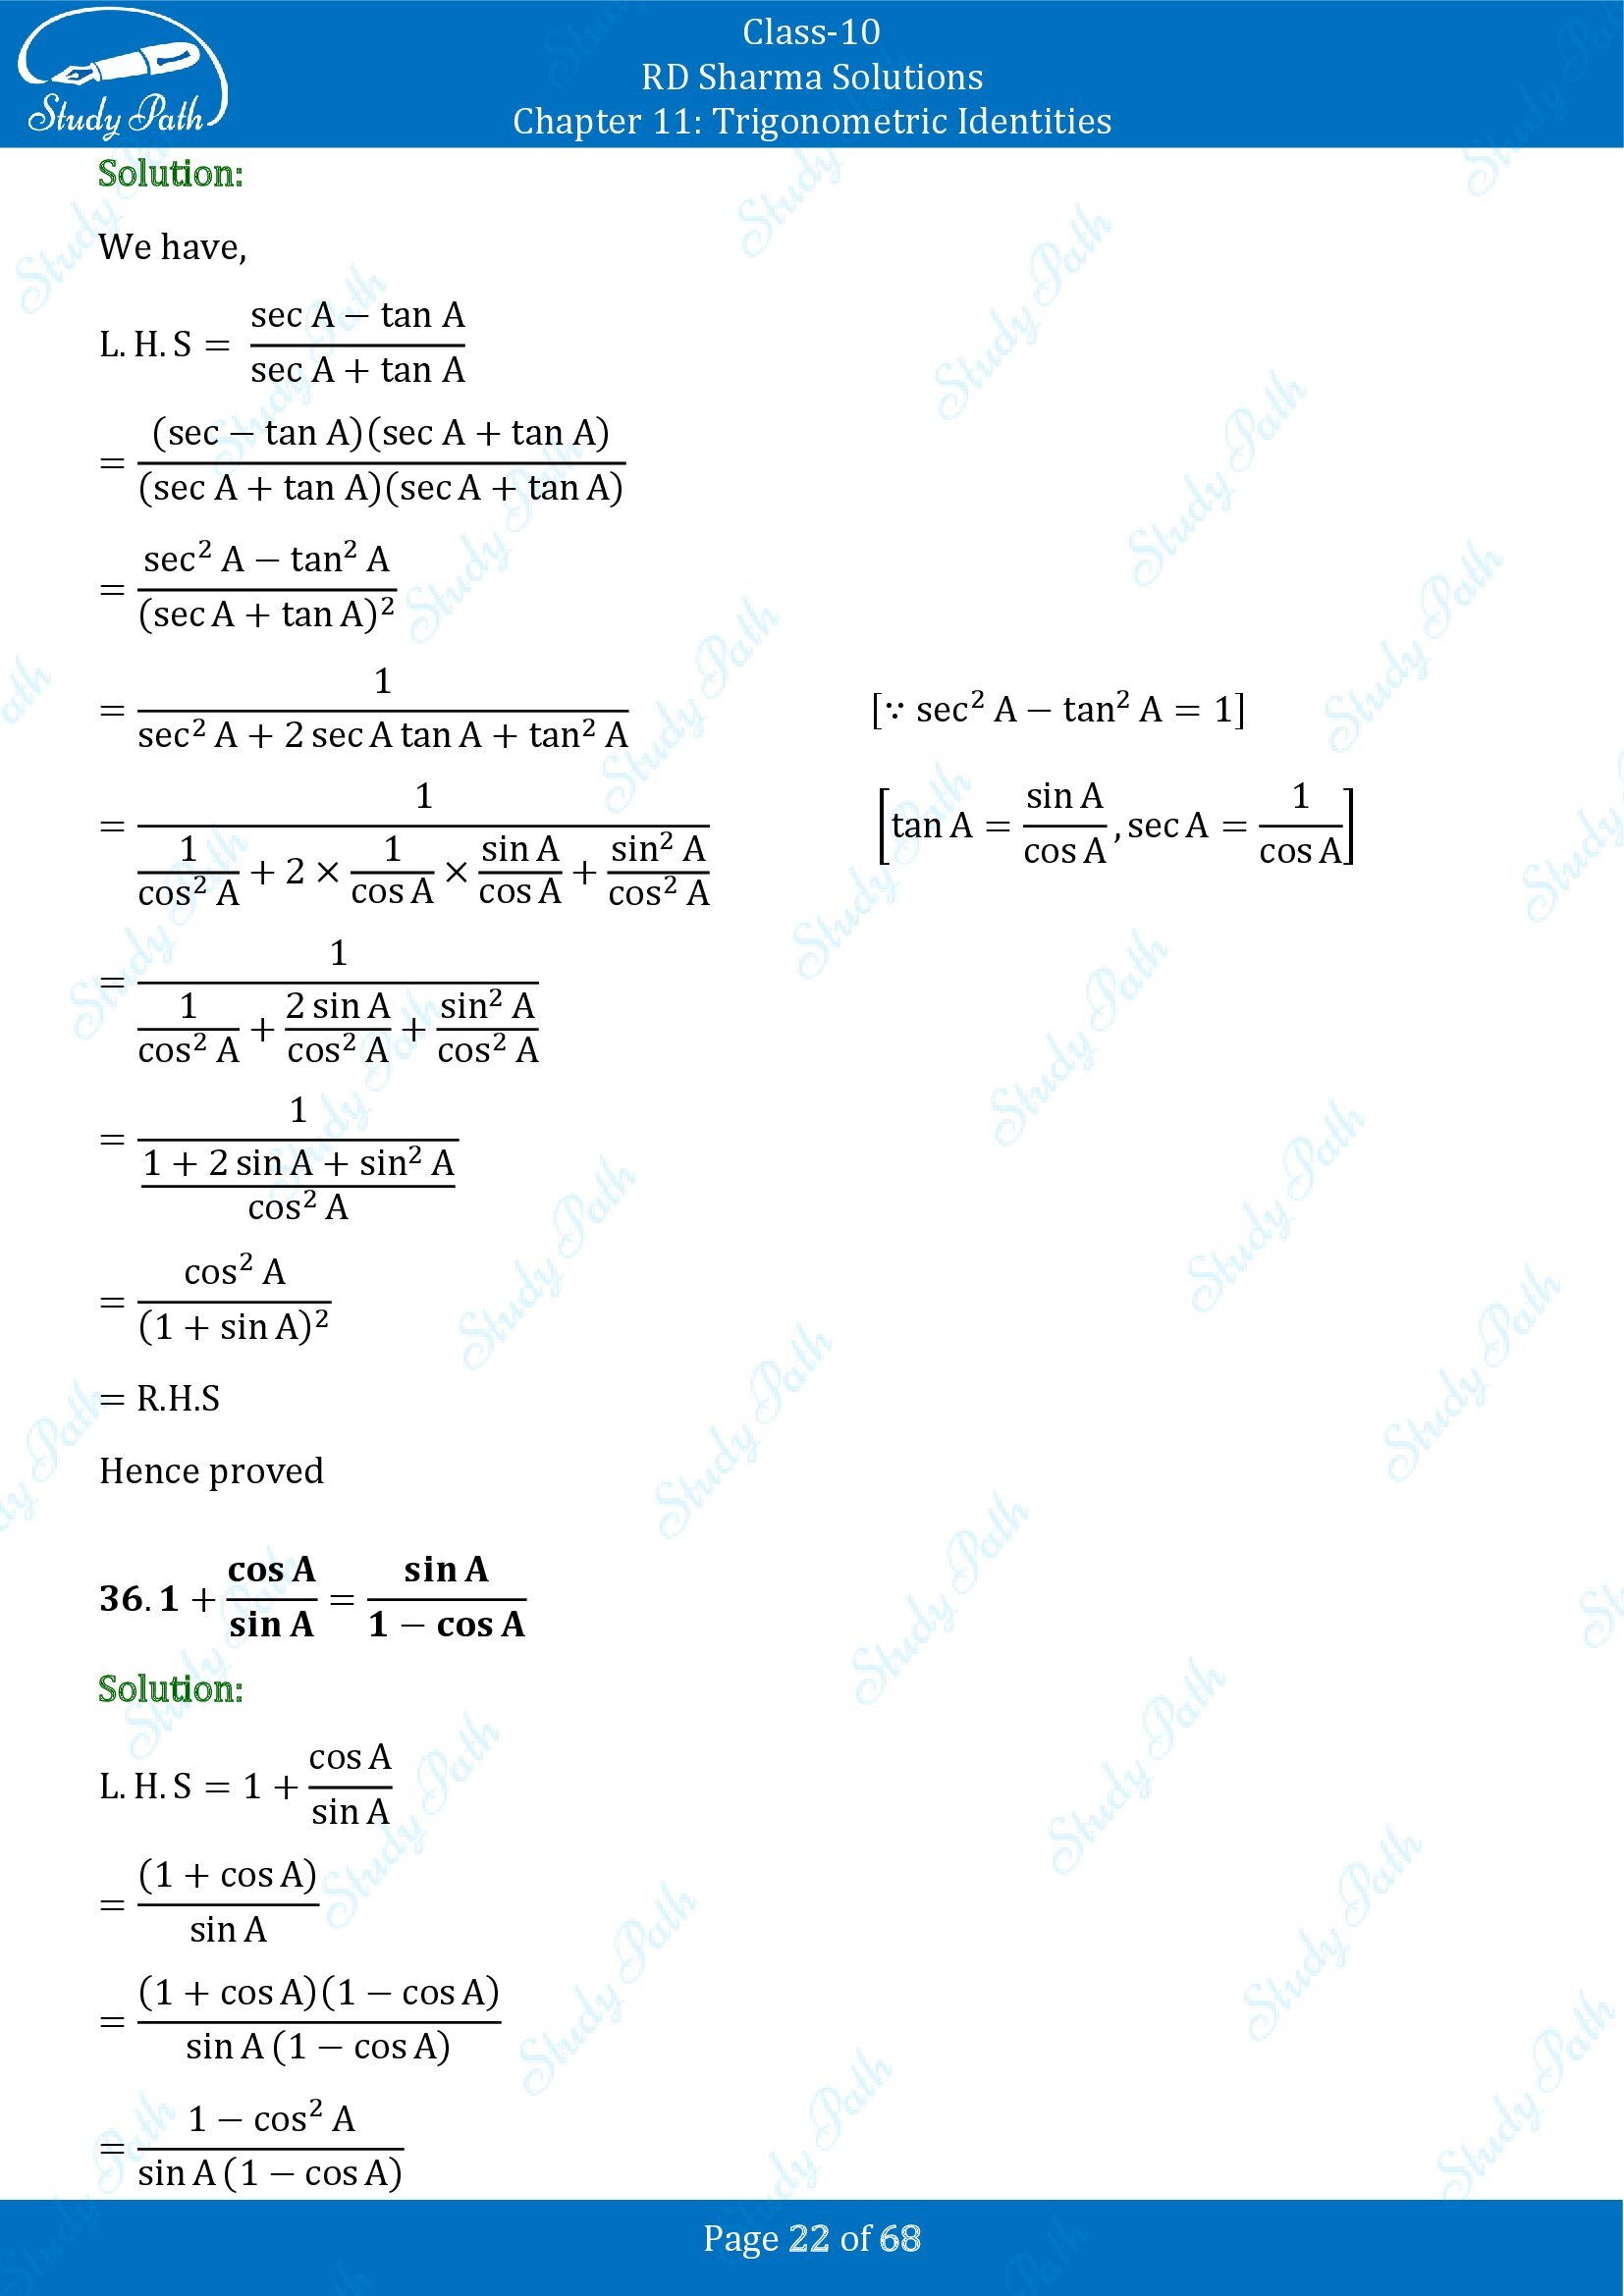 RD Sharma Solutions Class 10 Chapter 11 Trigonometric Identities Exercise 11.1 00022